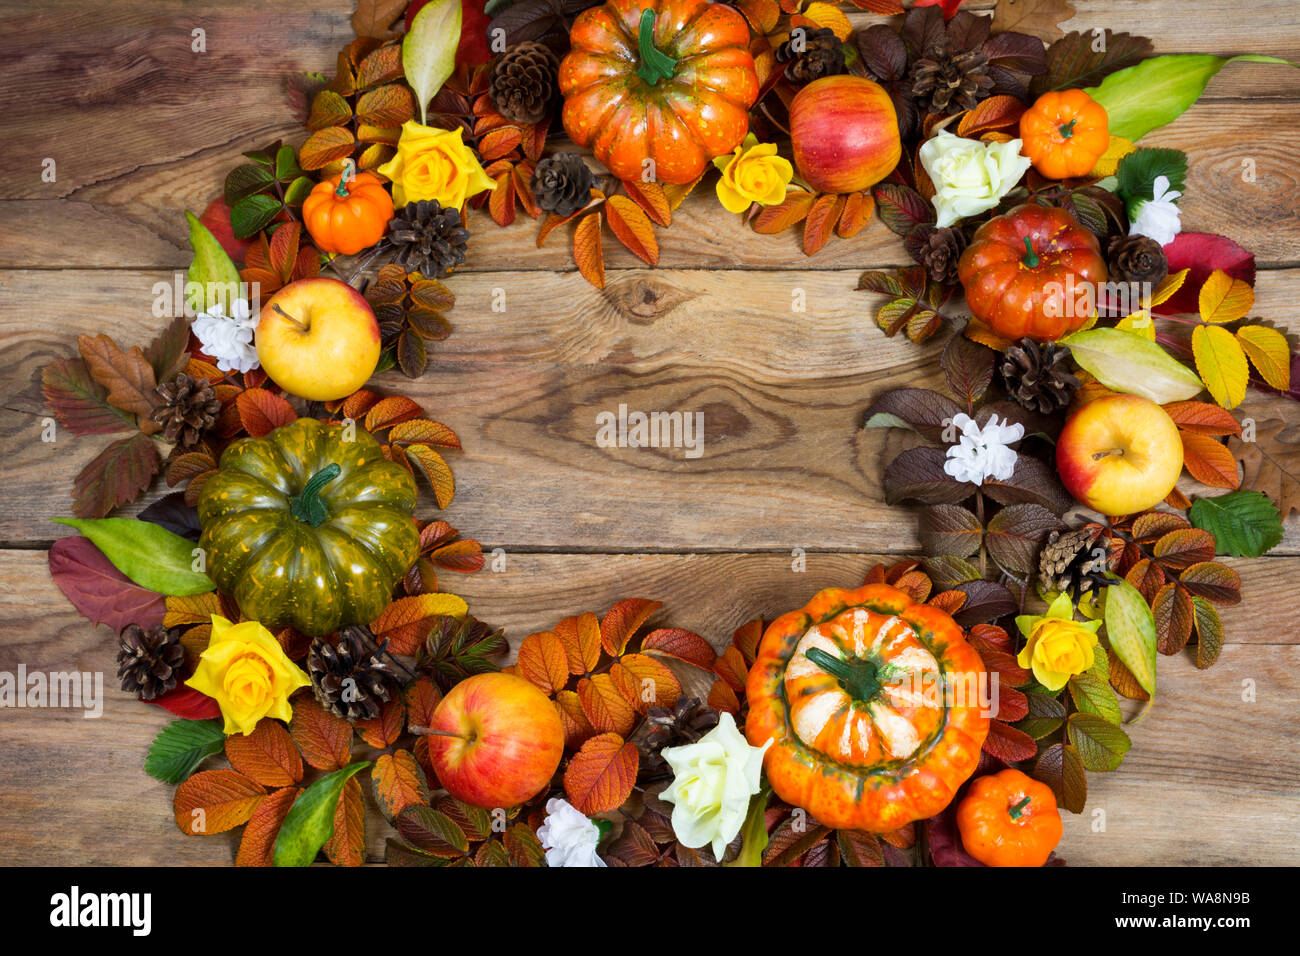 Thanksgiving wreath with pumpkins, apples, colorful fall leaves, pine cones, yellow roses and white flower wreath on the rustic wooden background Stock Photo